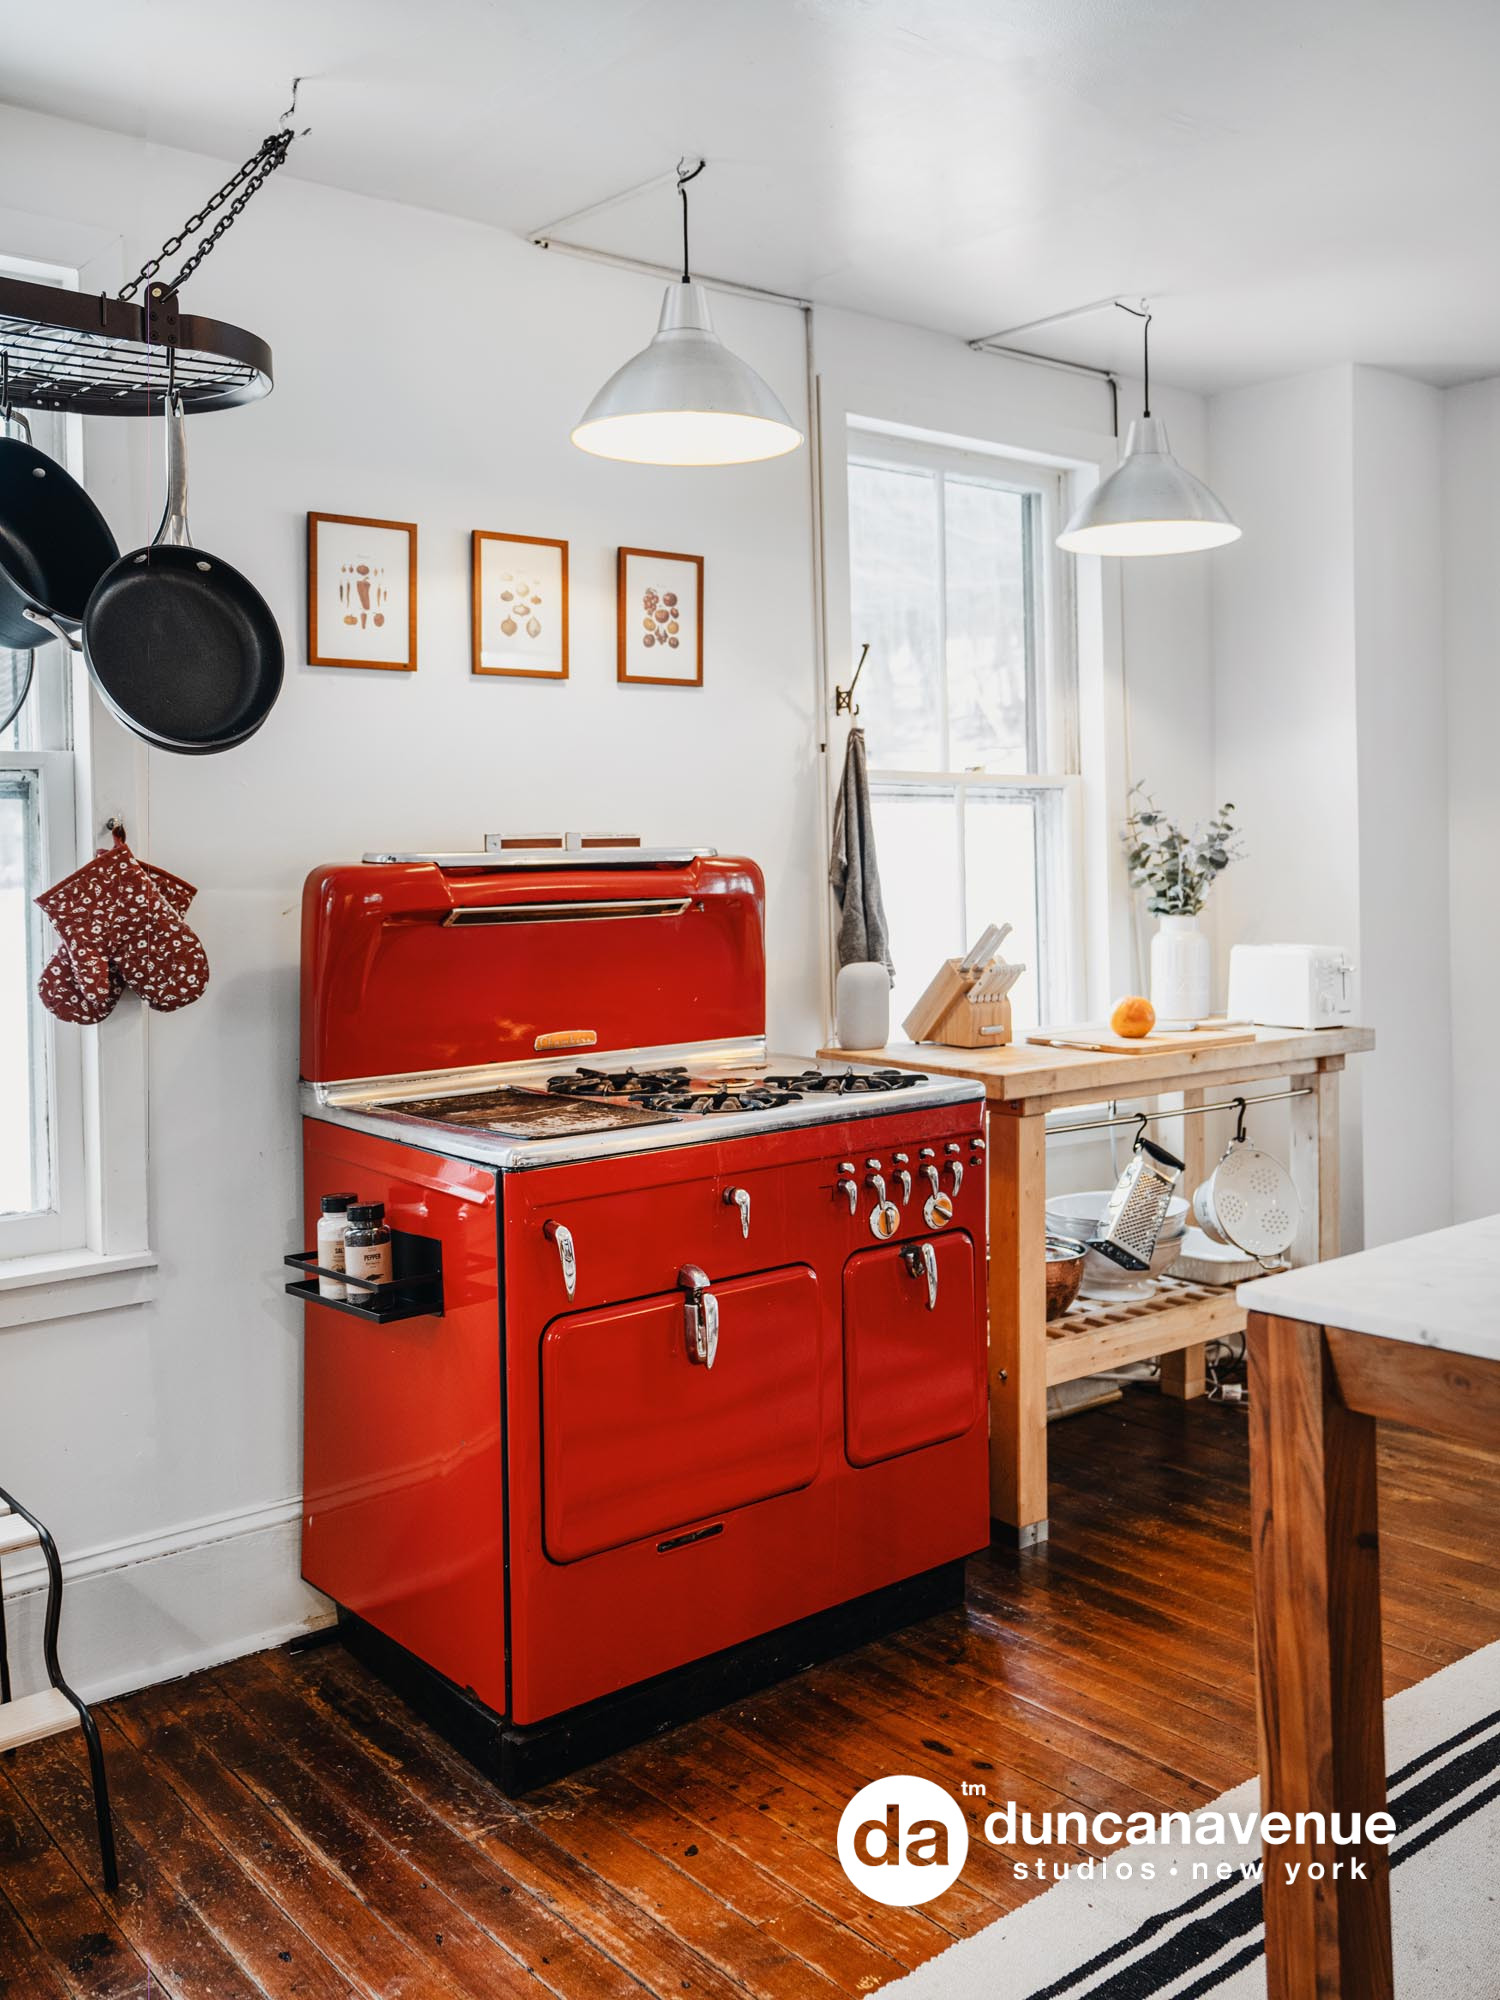 Catskill Mountains Farmhouse, Captured by Airbnb Photographer Maxwell Alexander – The best Airbnb Photography in New York – Vertical Airbnb Photography